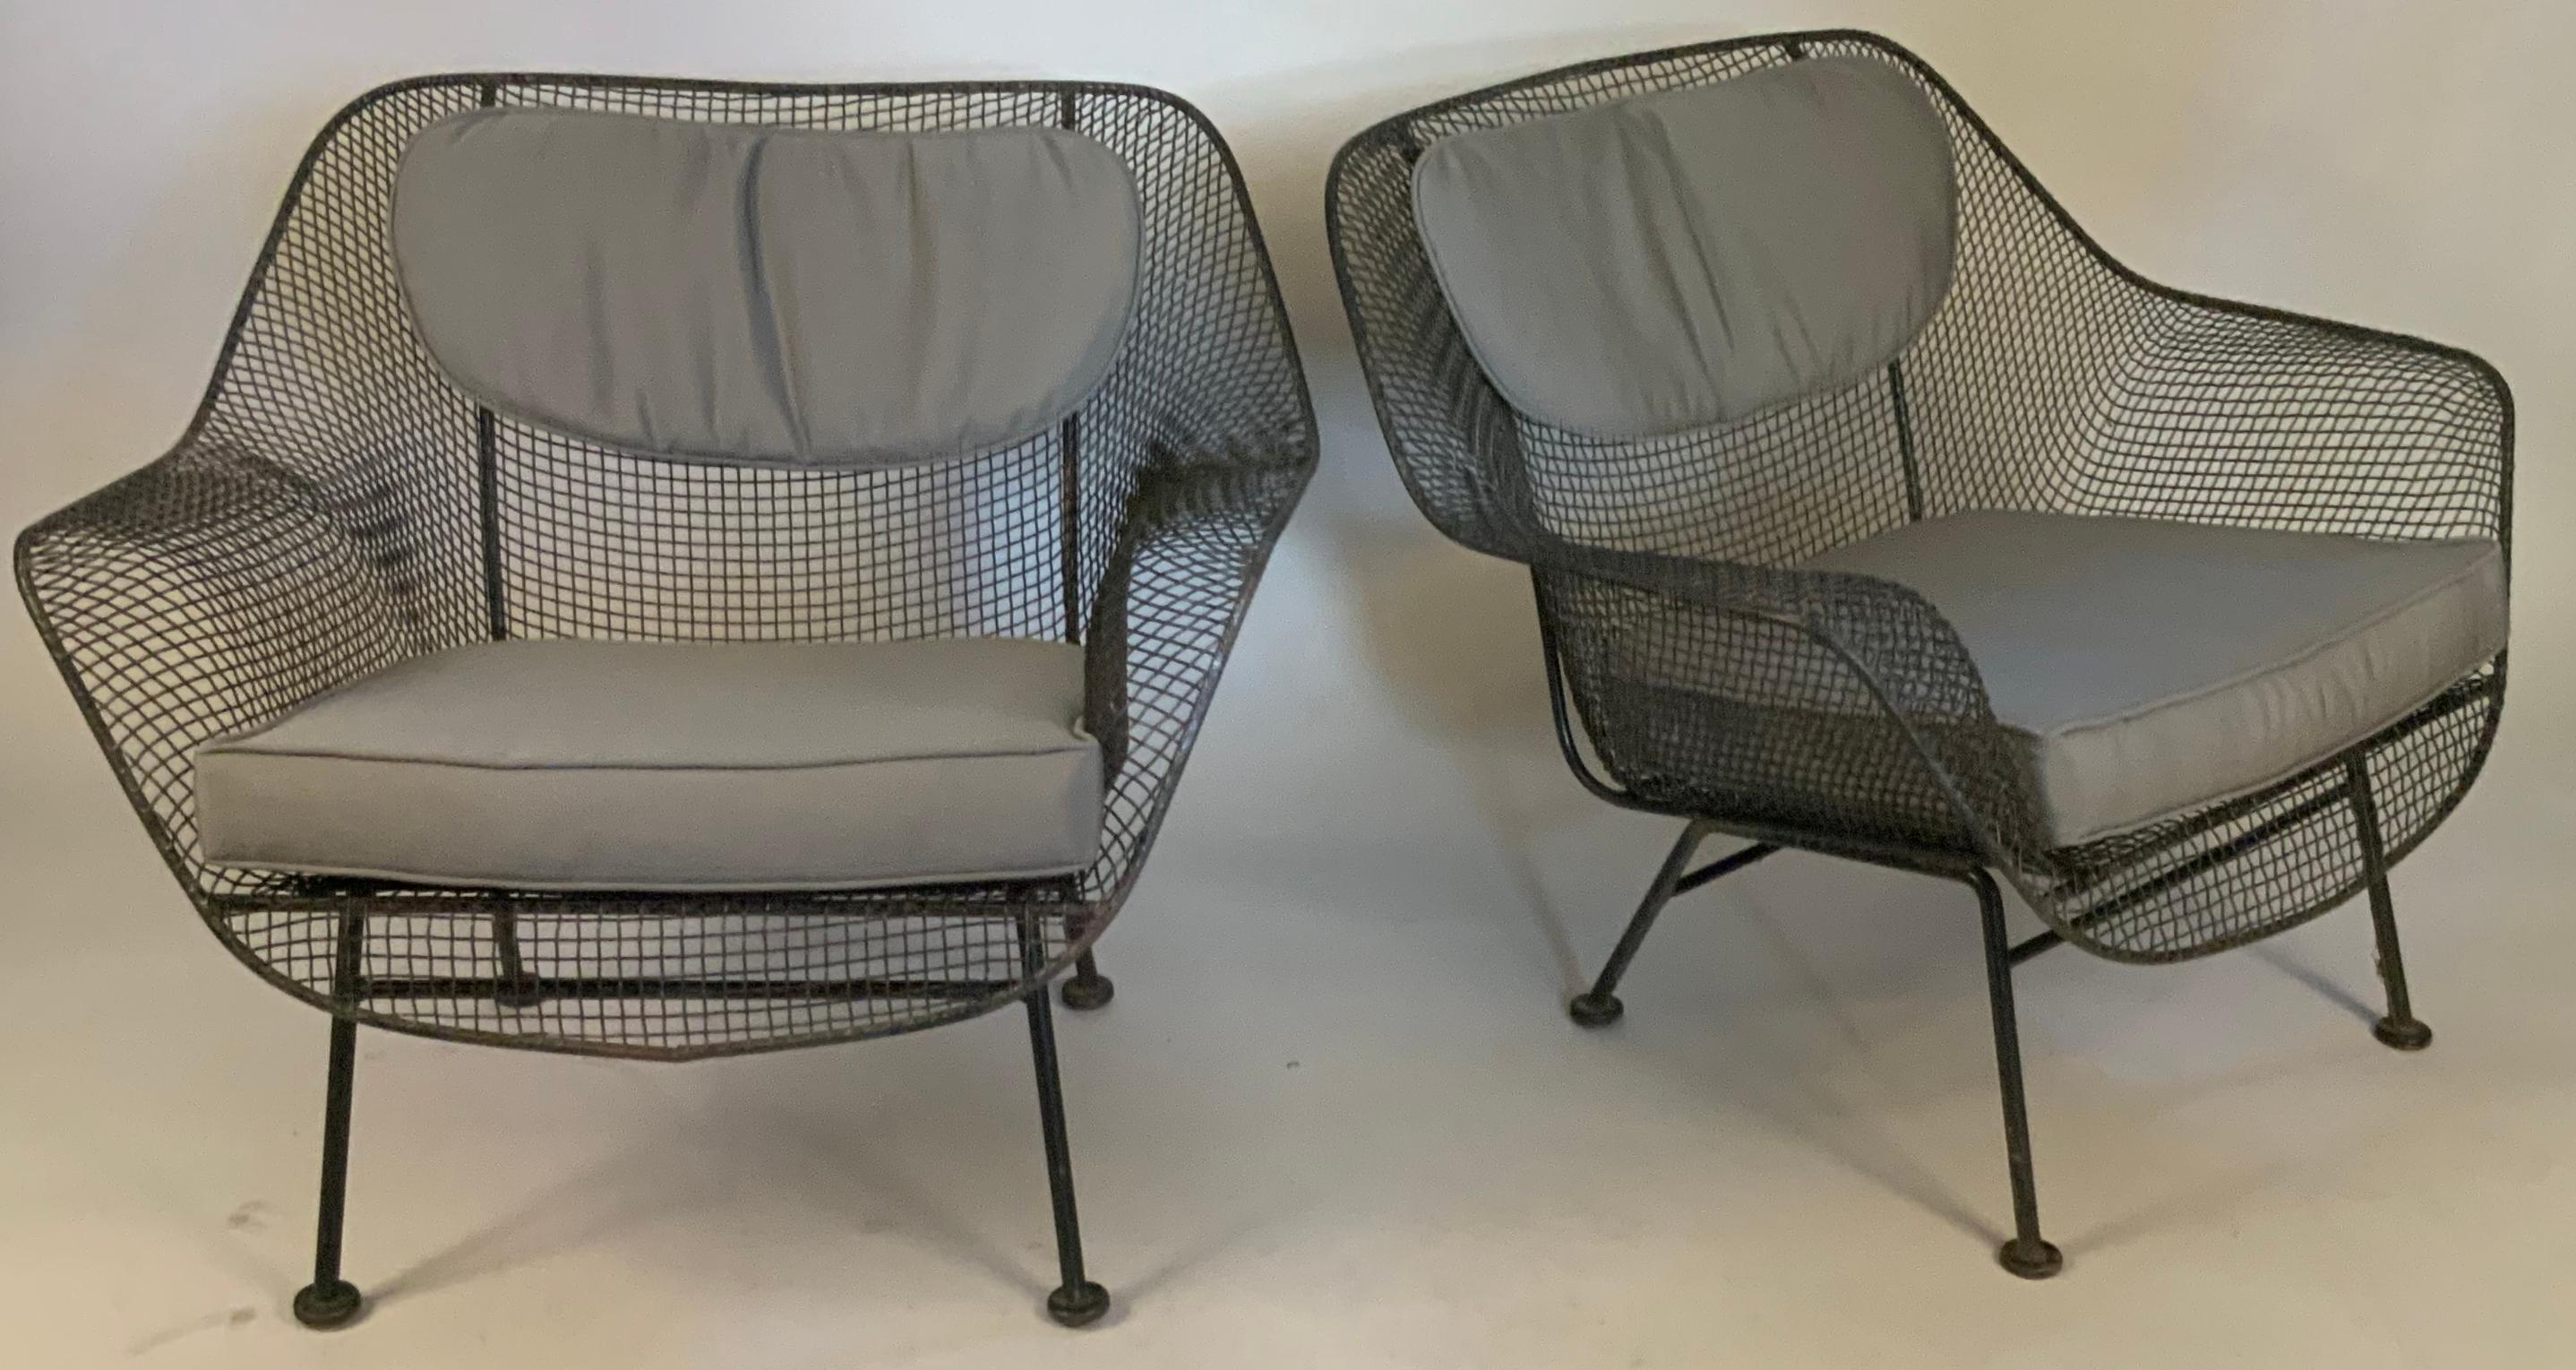 A set of Four of 1950's Sculptura wrought iron lounge chairs designed by Russell Woodard.

Woodard's Sculptura collection was made with wrought iron frames and woven steel mesh seats. These are the largest and most comfortable lounge chairs made